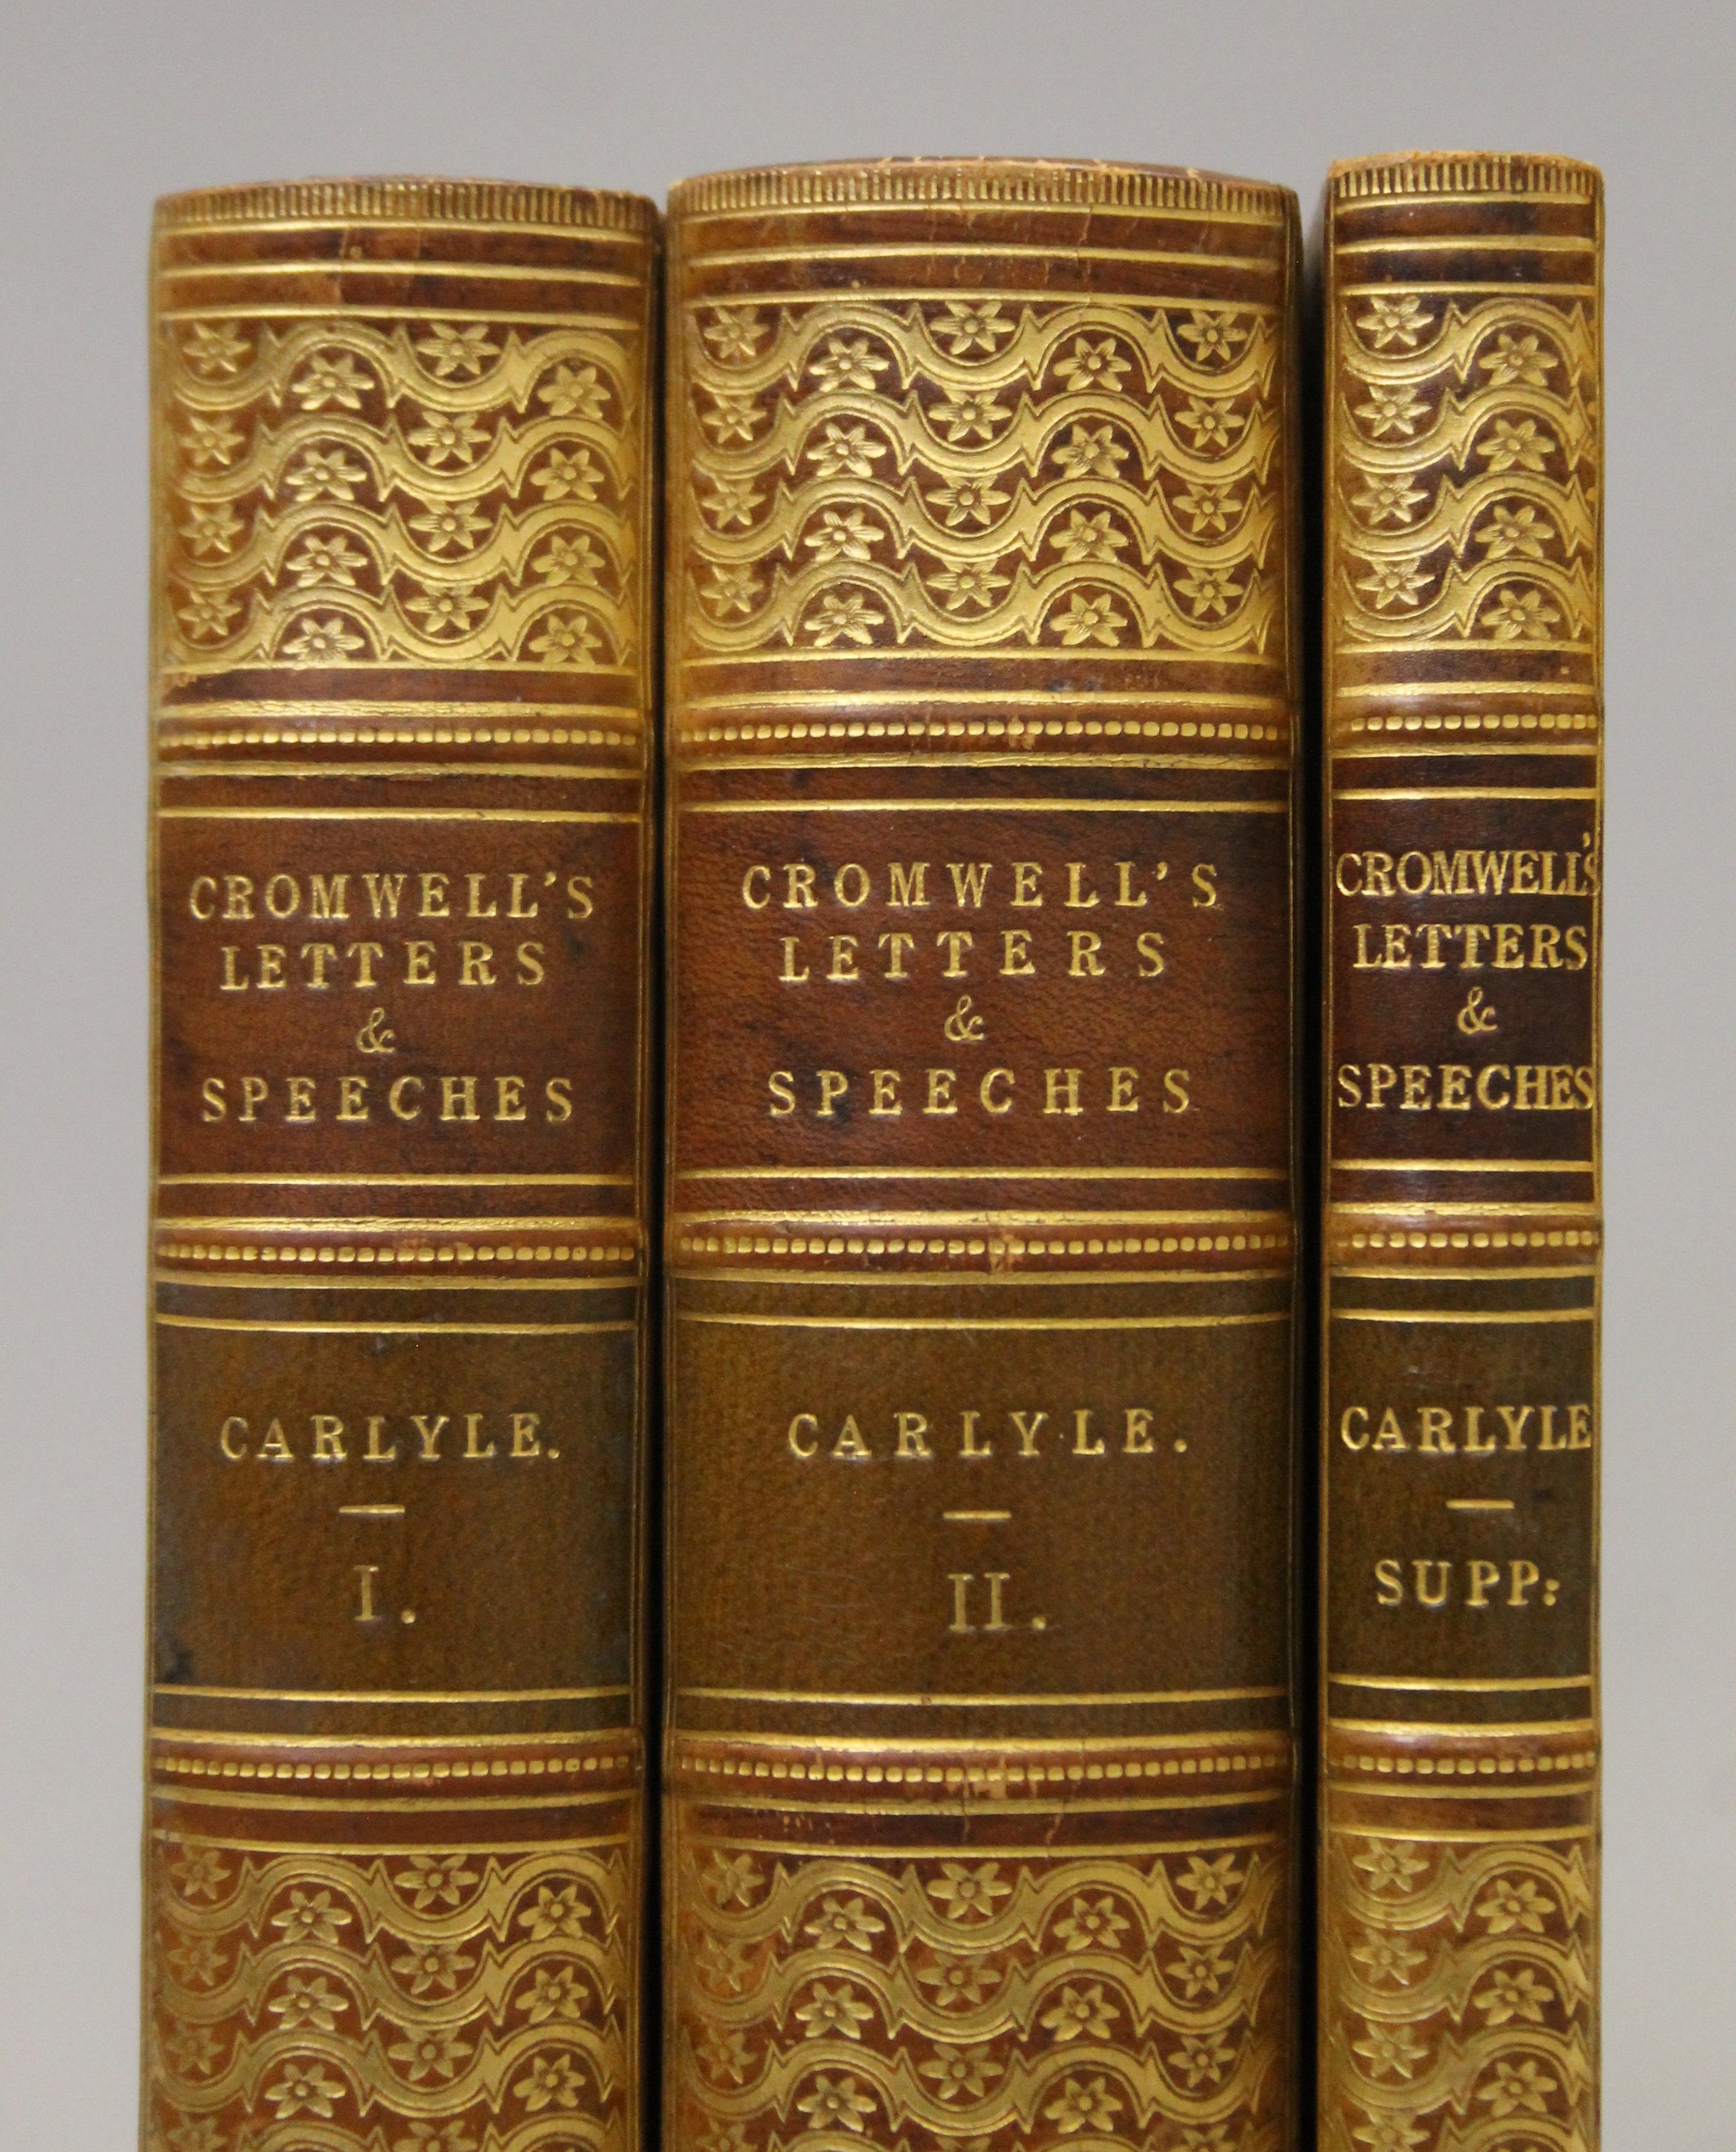 Carlyle (Thomas), Oliver Cromwell's Letters and Speeches, first edition, 3 vols, - Image 11 of 16